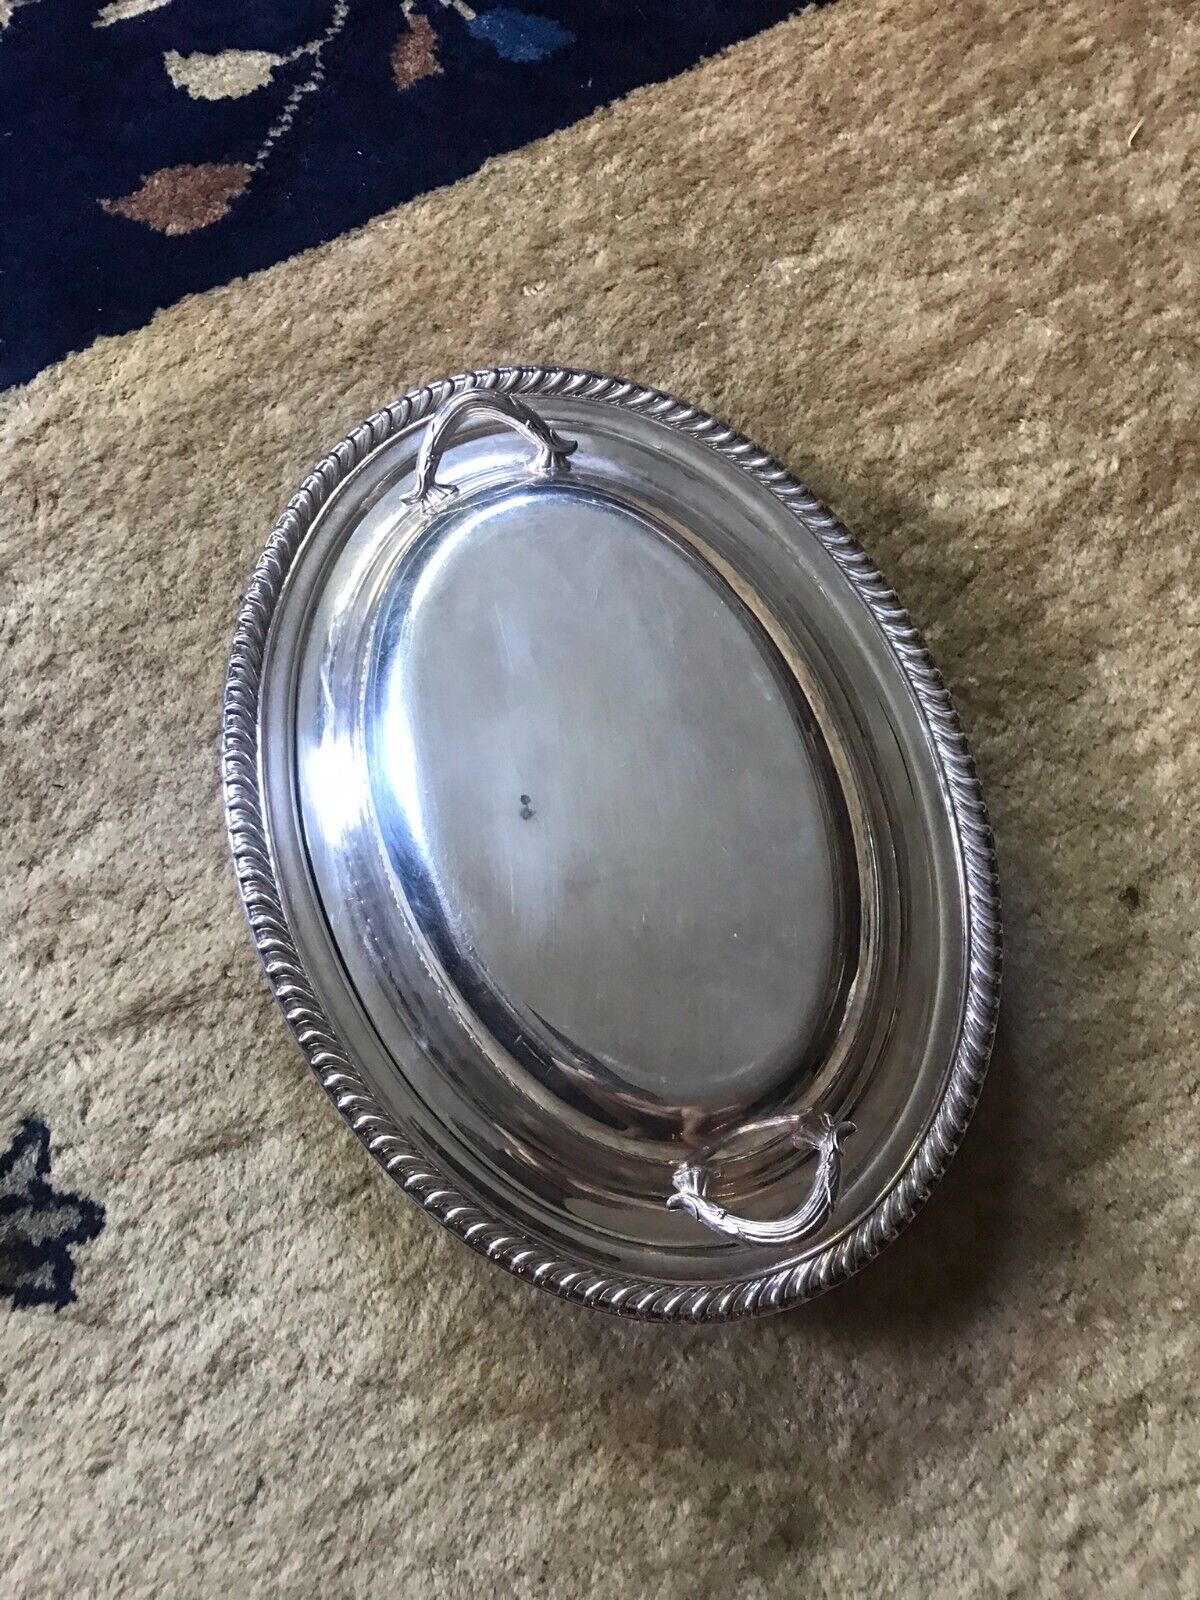 Vintage 1970s WM Rogers Silver Plated Oval Side Serving Dish w/ Handled lid